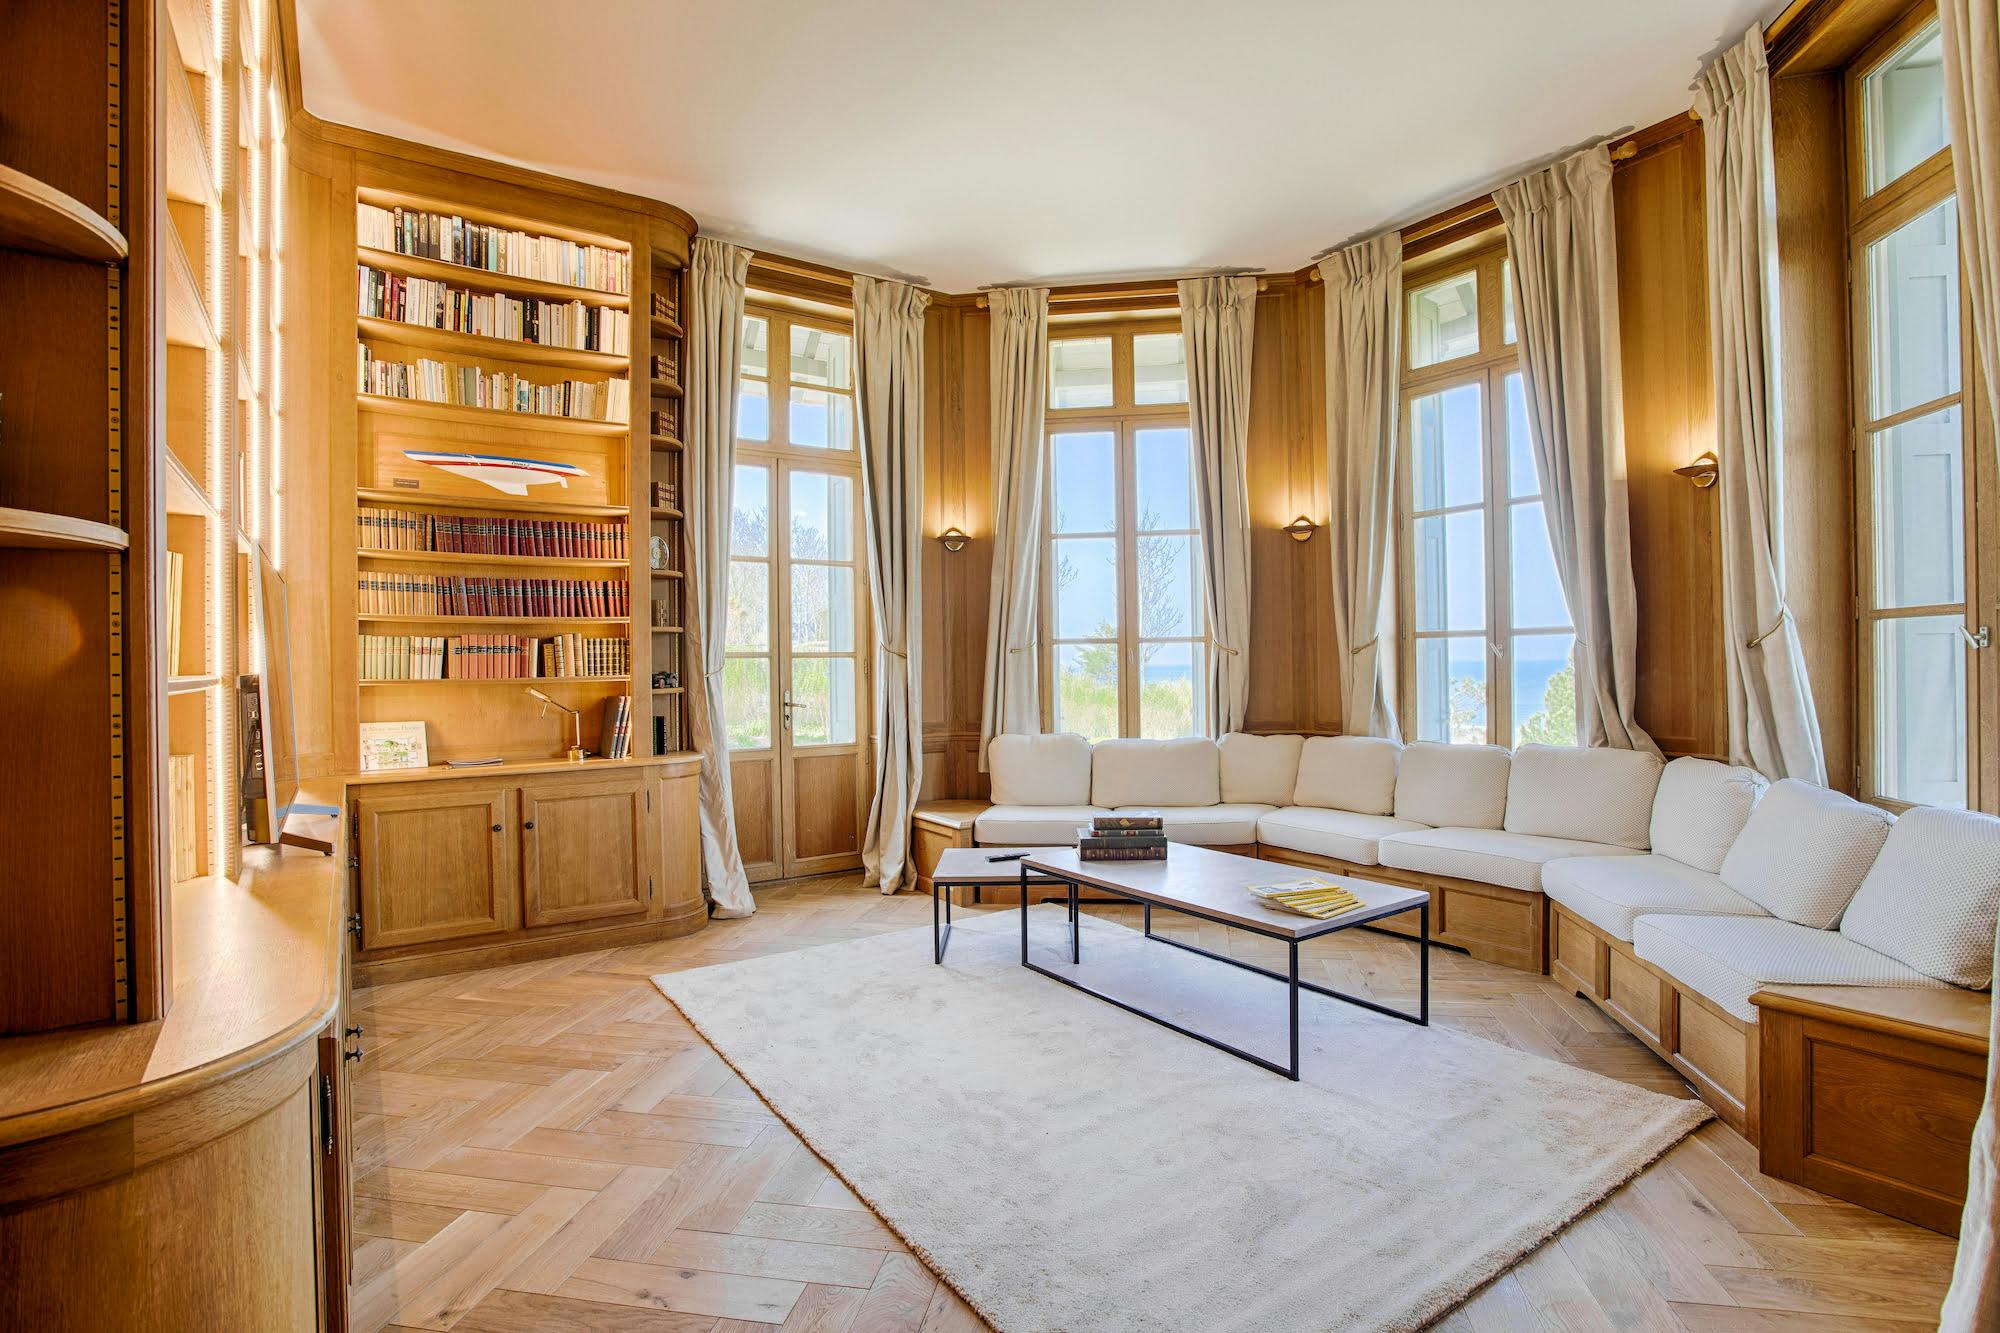 A cozy, wood-paneled library with a view of the sea